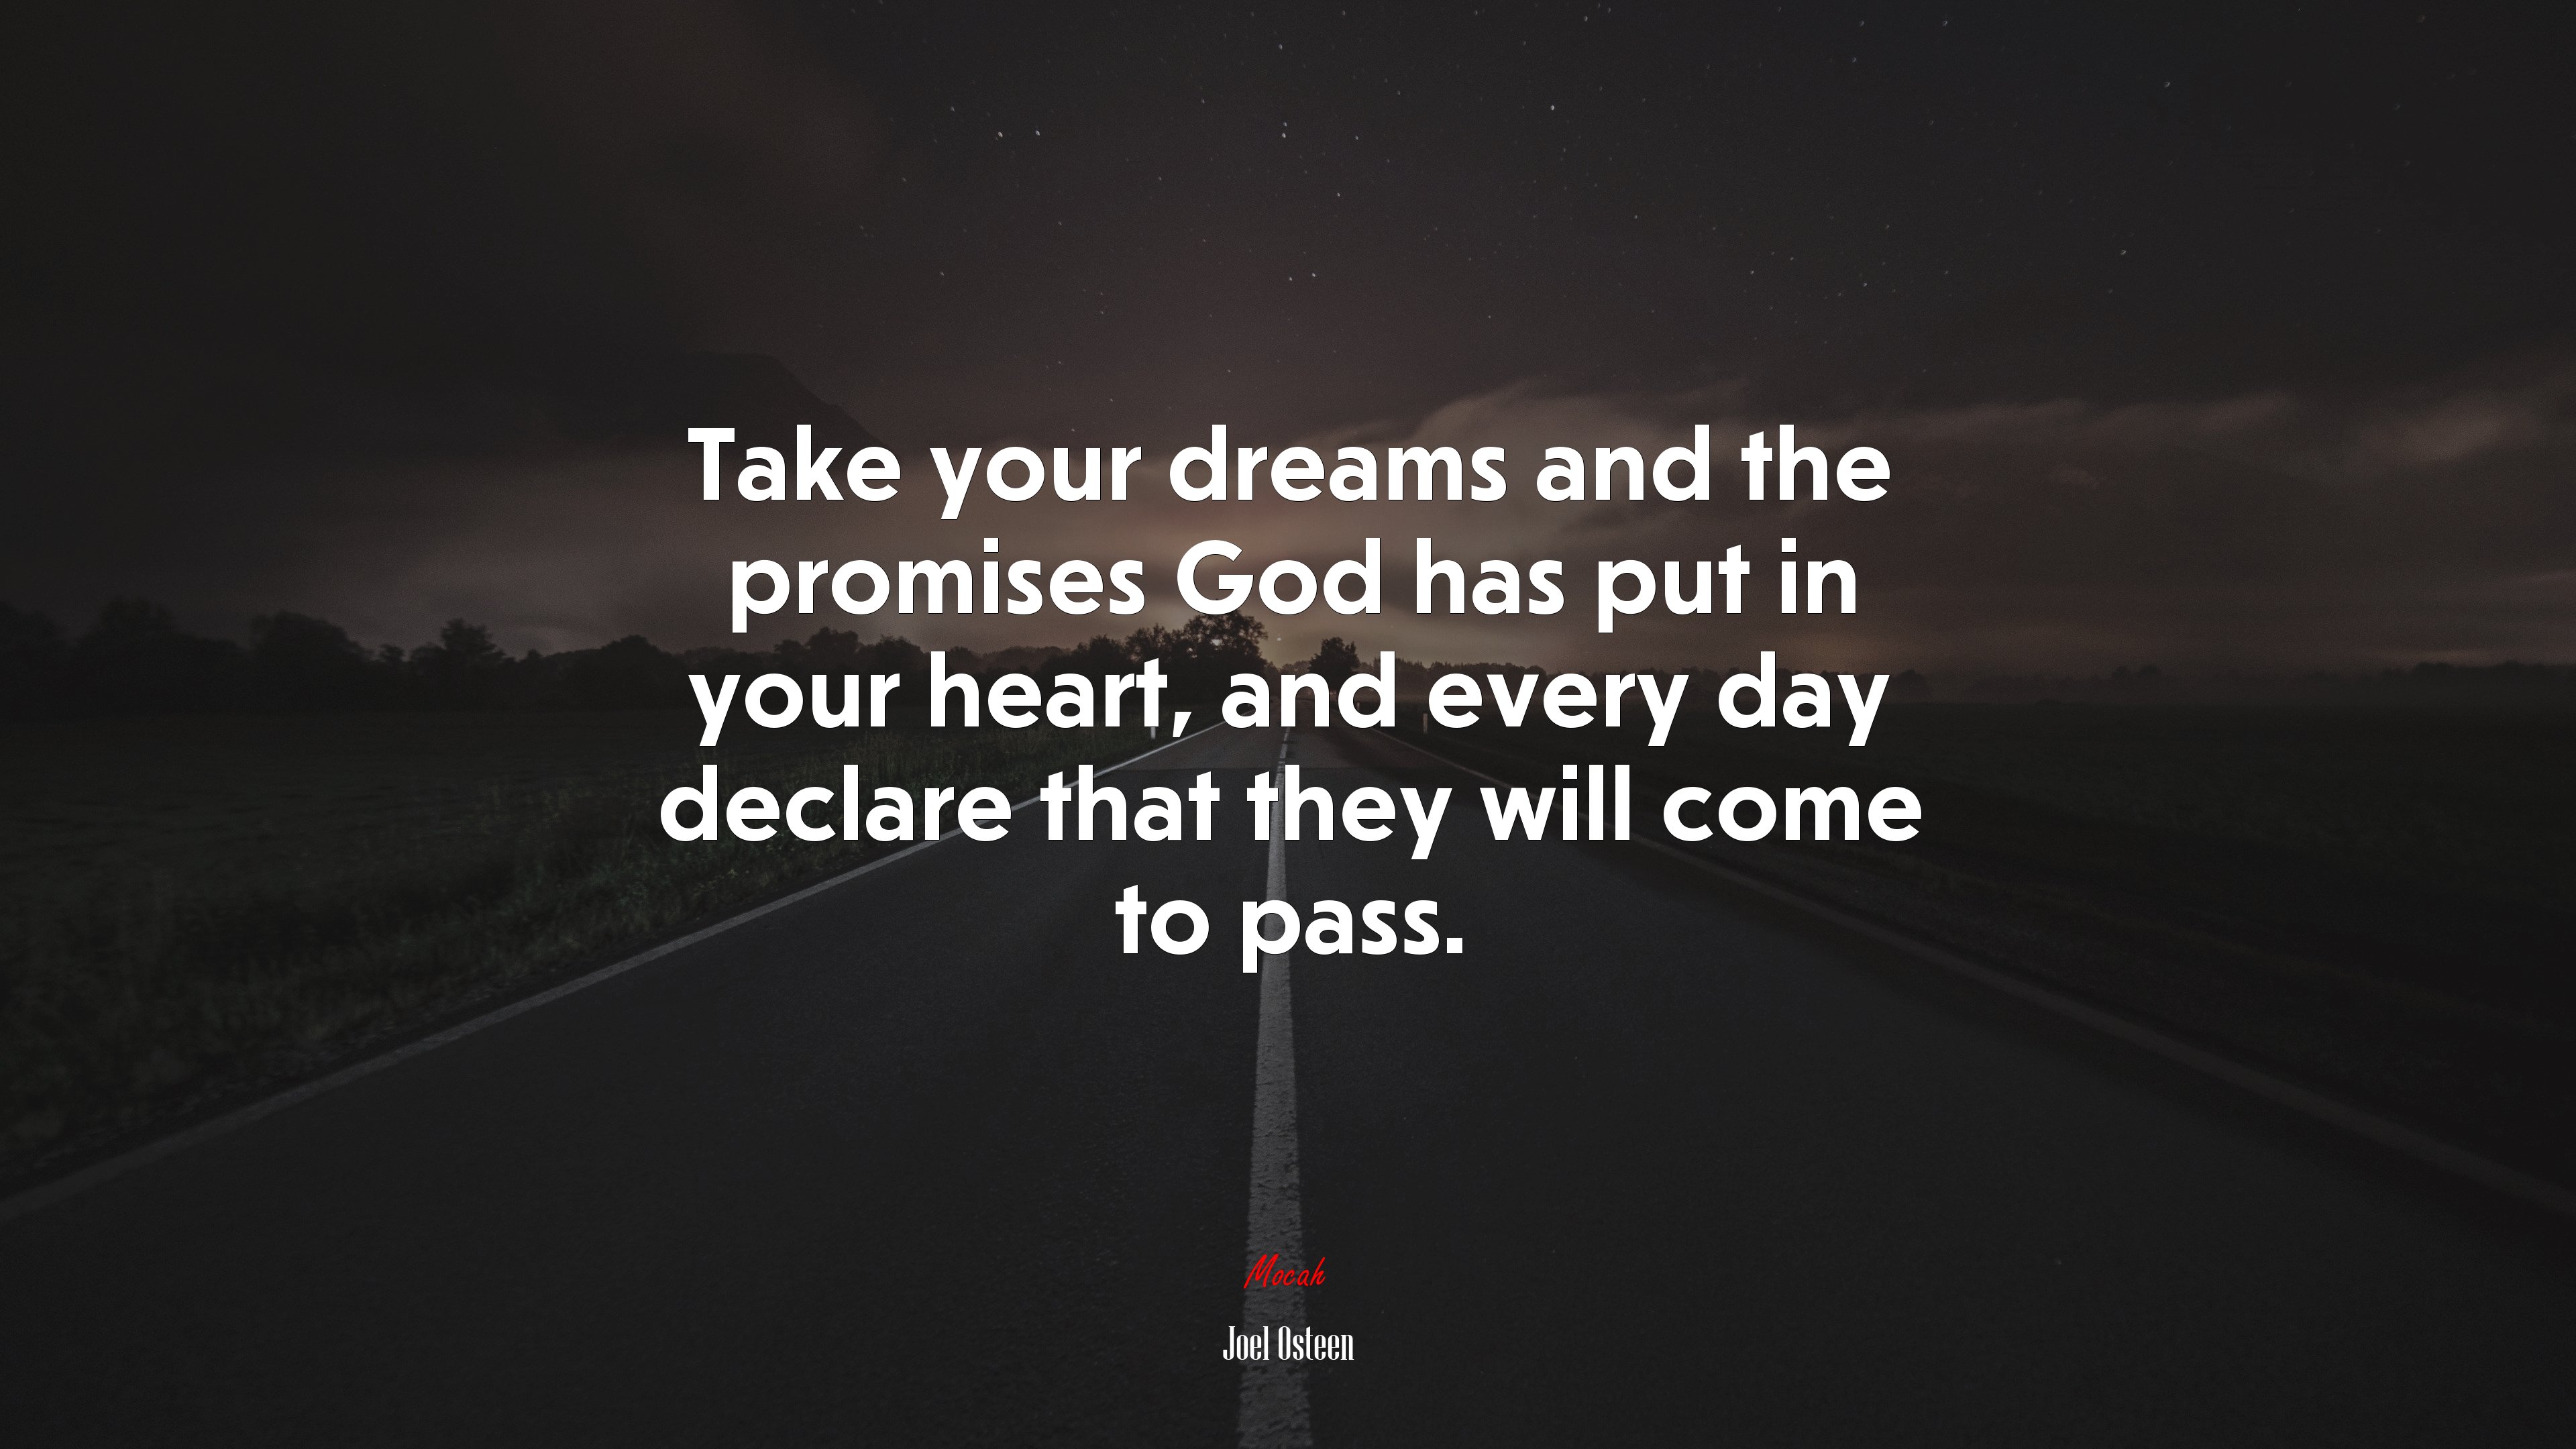 Take your dreams and the promises God has put in your heart, and every day declare that they will come to pass. Joel Osteen quote, 4k wallpaper HD Wallpaper